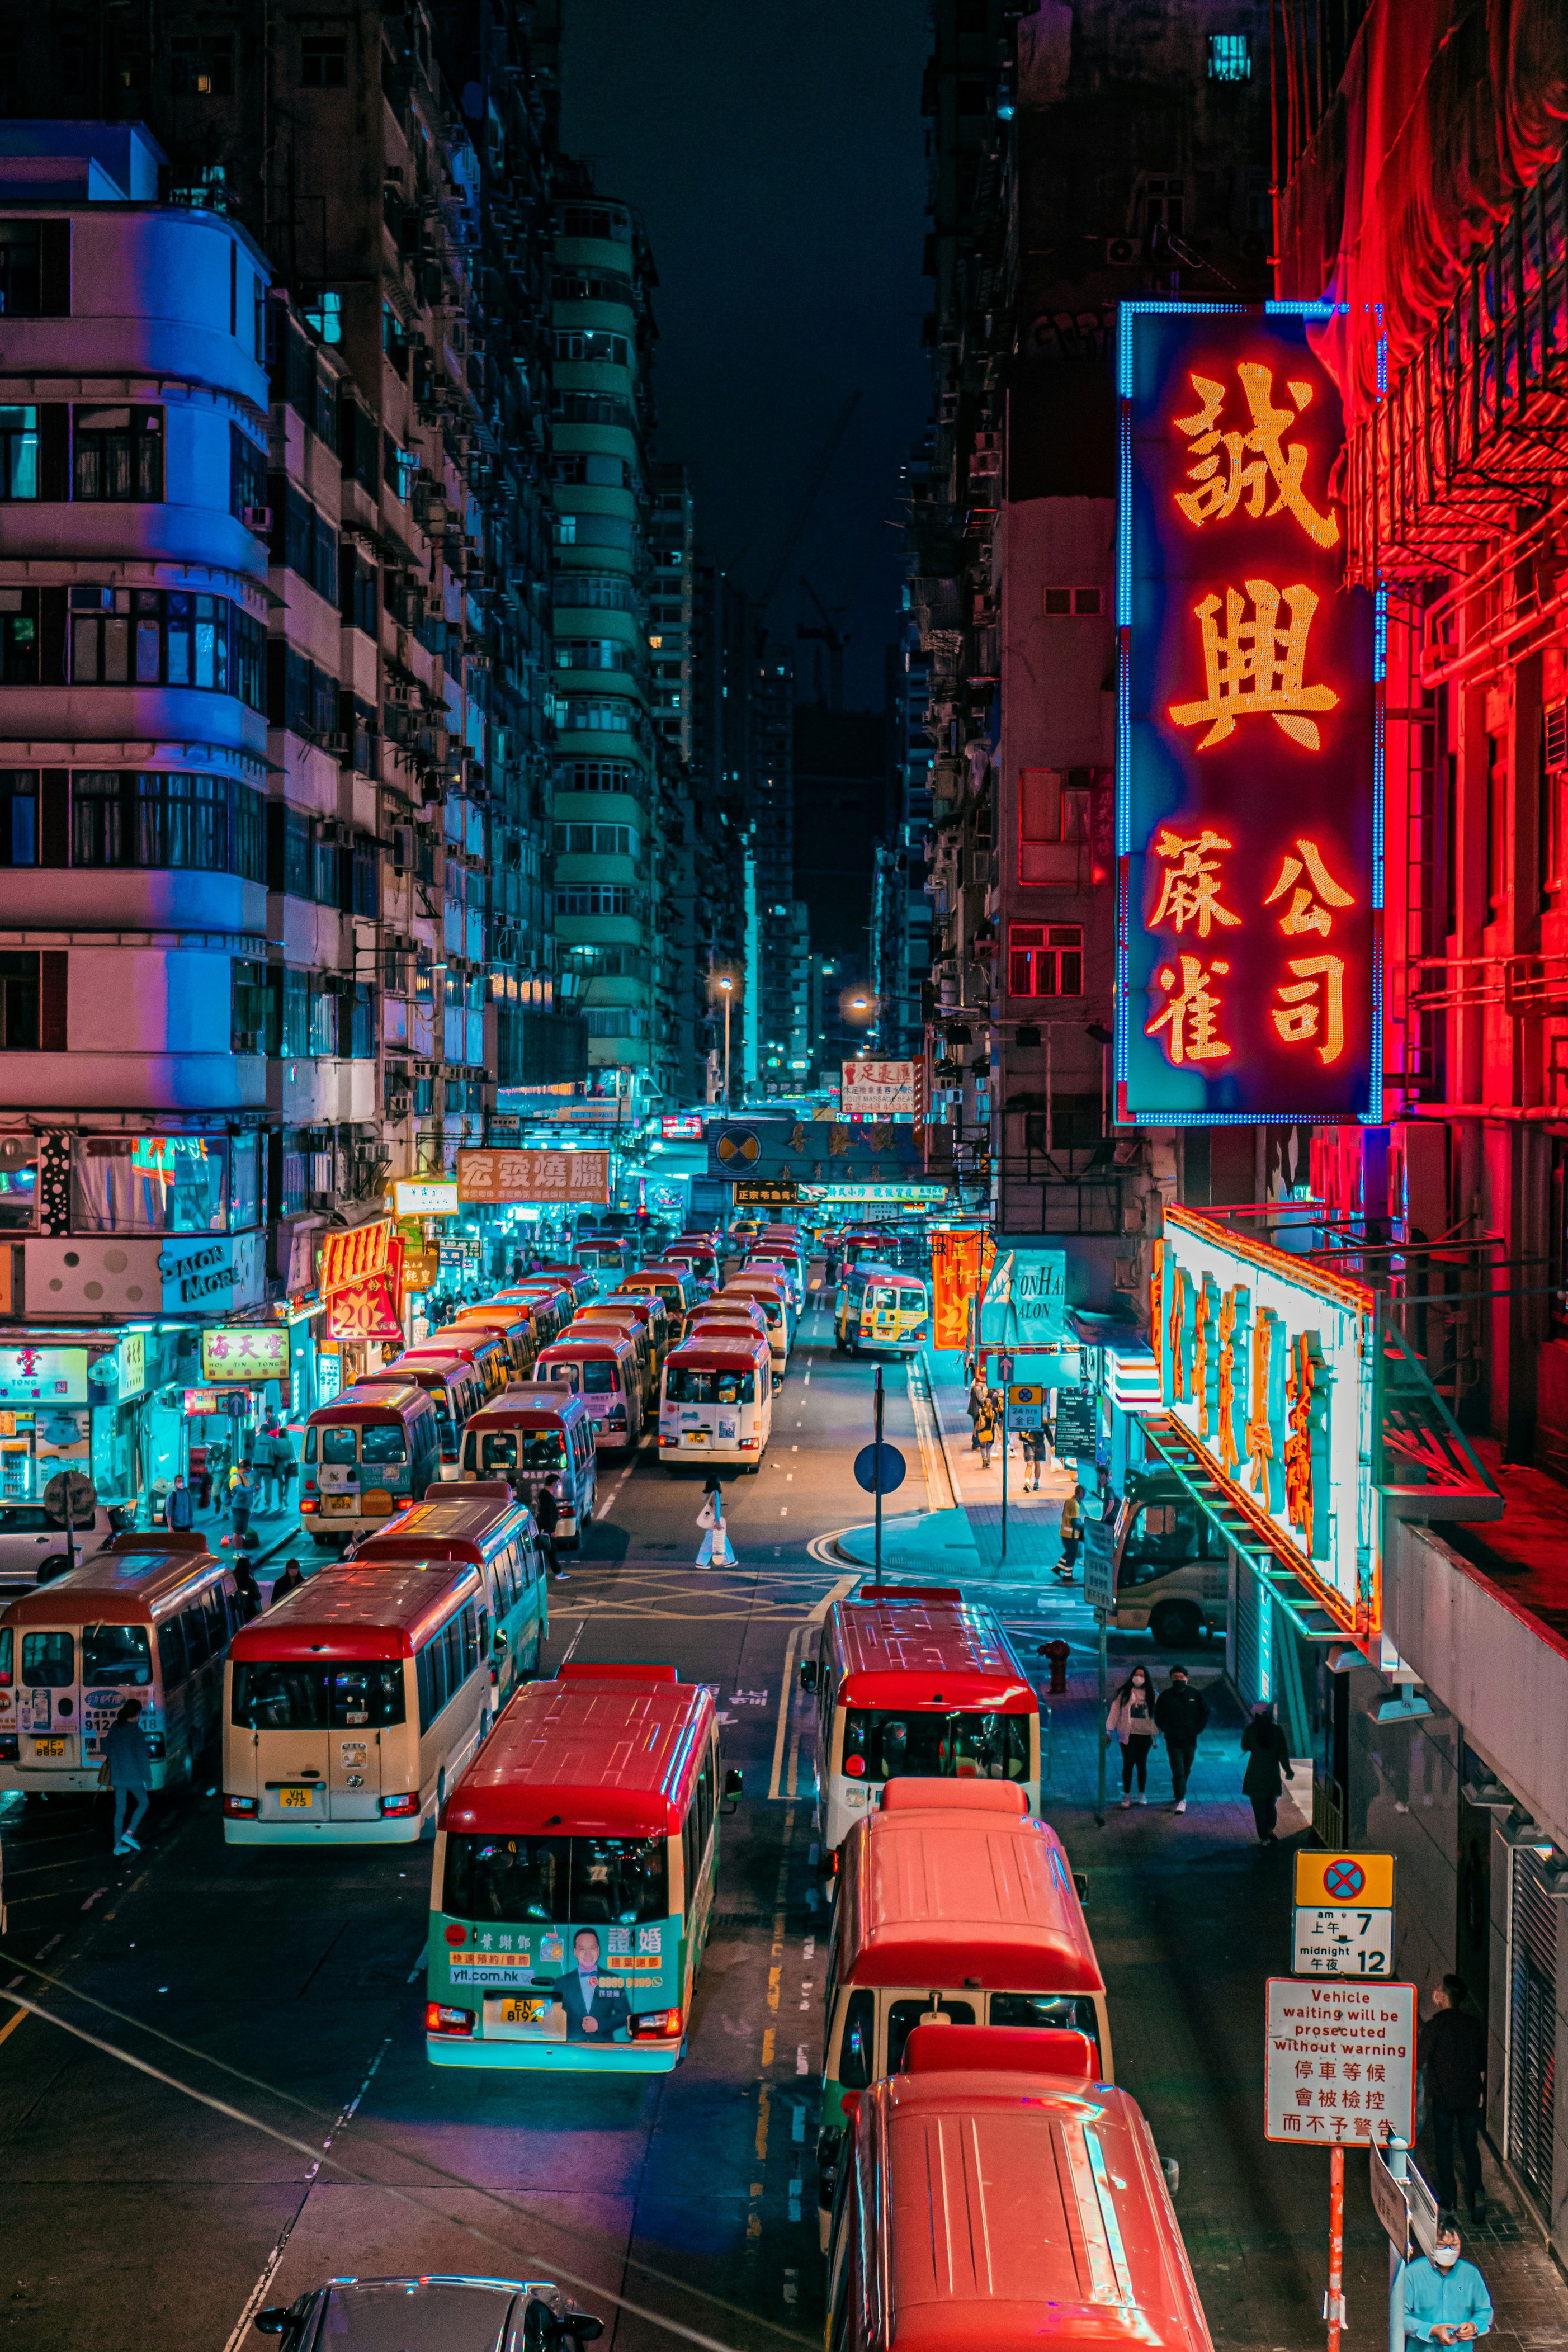 <p><a href="https://www.cntraveler.com/destinations/hong-kong?mbid=synd_msn_rss&utm_source=msn&utm_medium=syndication">Hong Kong’s</a> public transit system offers such extensive, affordable, and accessible service that the majority of residents do not own cars.</p> <p>Hong Kong’s Mass Transit Railway has an unbelievable on-time rate of 99.9%, with 97 of its 98 stations accessible from the street level. Additionally, each station offers free WiFi, charging stations, and clean public toilets; many now include breastfeeding rooms, too. With rides that cost only about 60 cents, it is impossible to find a cheaper, faster, or more predictable way to get where you want to go.</p> <p>You can also take in the spectacular sights of the city while riding the double-decker Hong Kong Tramway, or gaze down below from the impressively steep heights of the Peak Tram funicular. For island hopping, take the Star Ferry across the harbor from Hong Kong Island to visit Kowloon while enjoying the jaw-dropping skyline.</p> <p><strong>How to experience it:</strong> Take the 10-minute <a href="https://www.starferry.com.hk/en/home">Star Ferry</a> from Hong Kong Island to Kowloon for $3.70 HKD (US$ 0.50) for an upper deck seat.</p><p>Sign up to receive the latest news, expert tips, and inspiration on all things travel</p><a href="https://www.cntraveler.com/newsletter/the-daily?sourceCode=msnsend">Inspire Me</a>